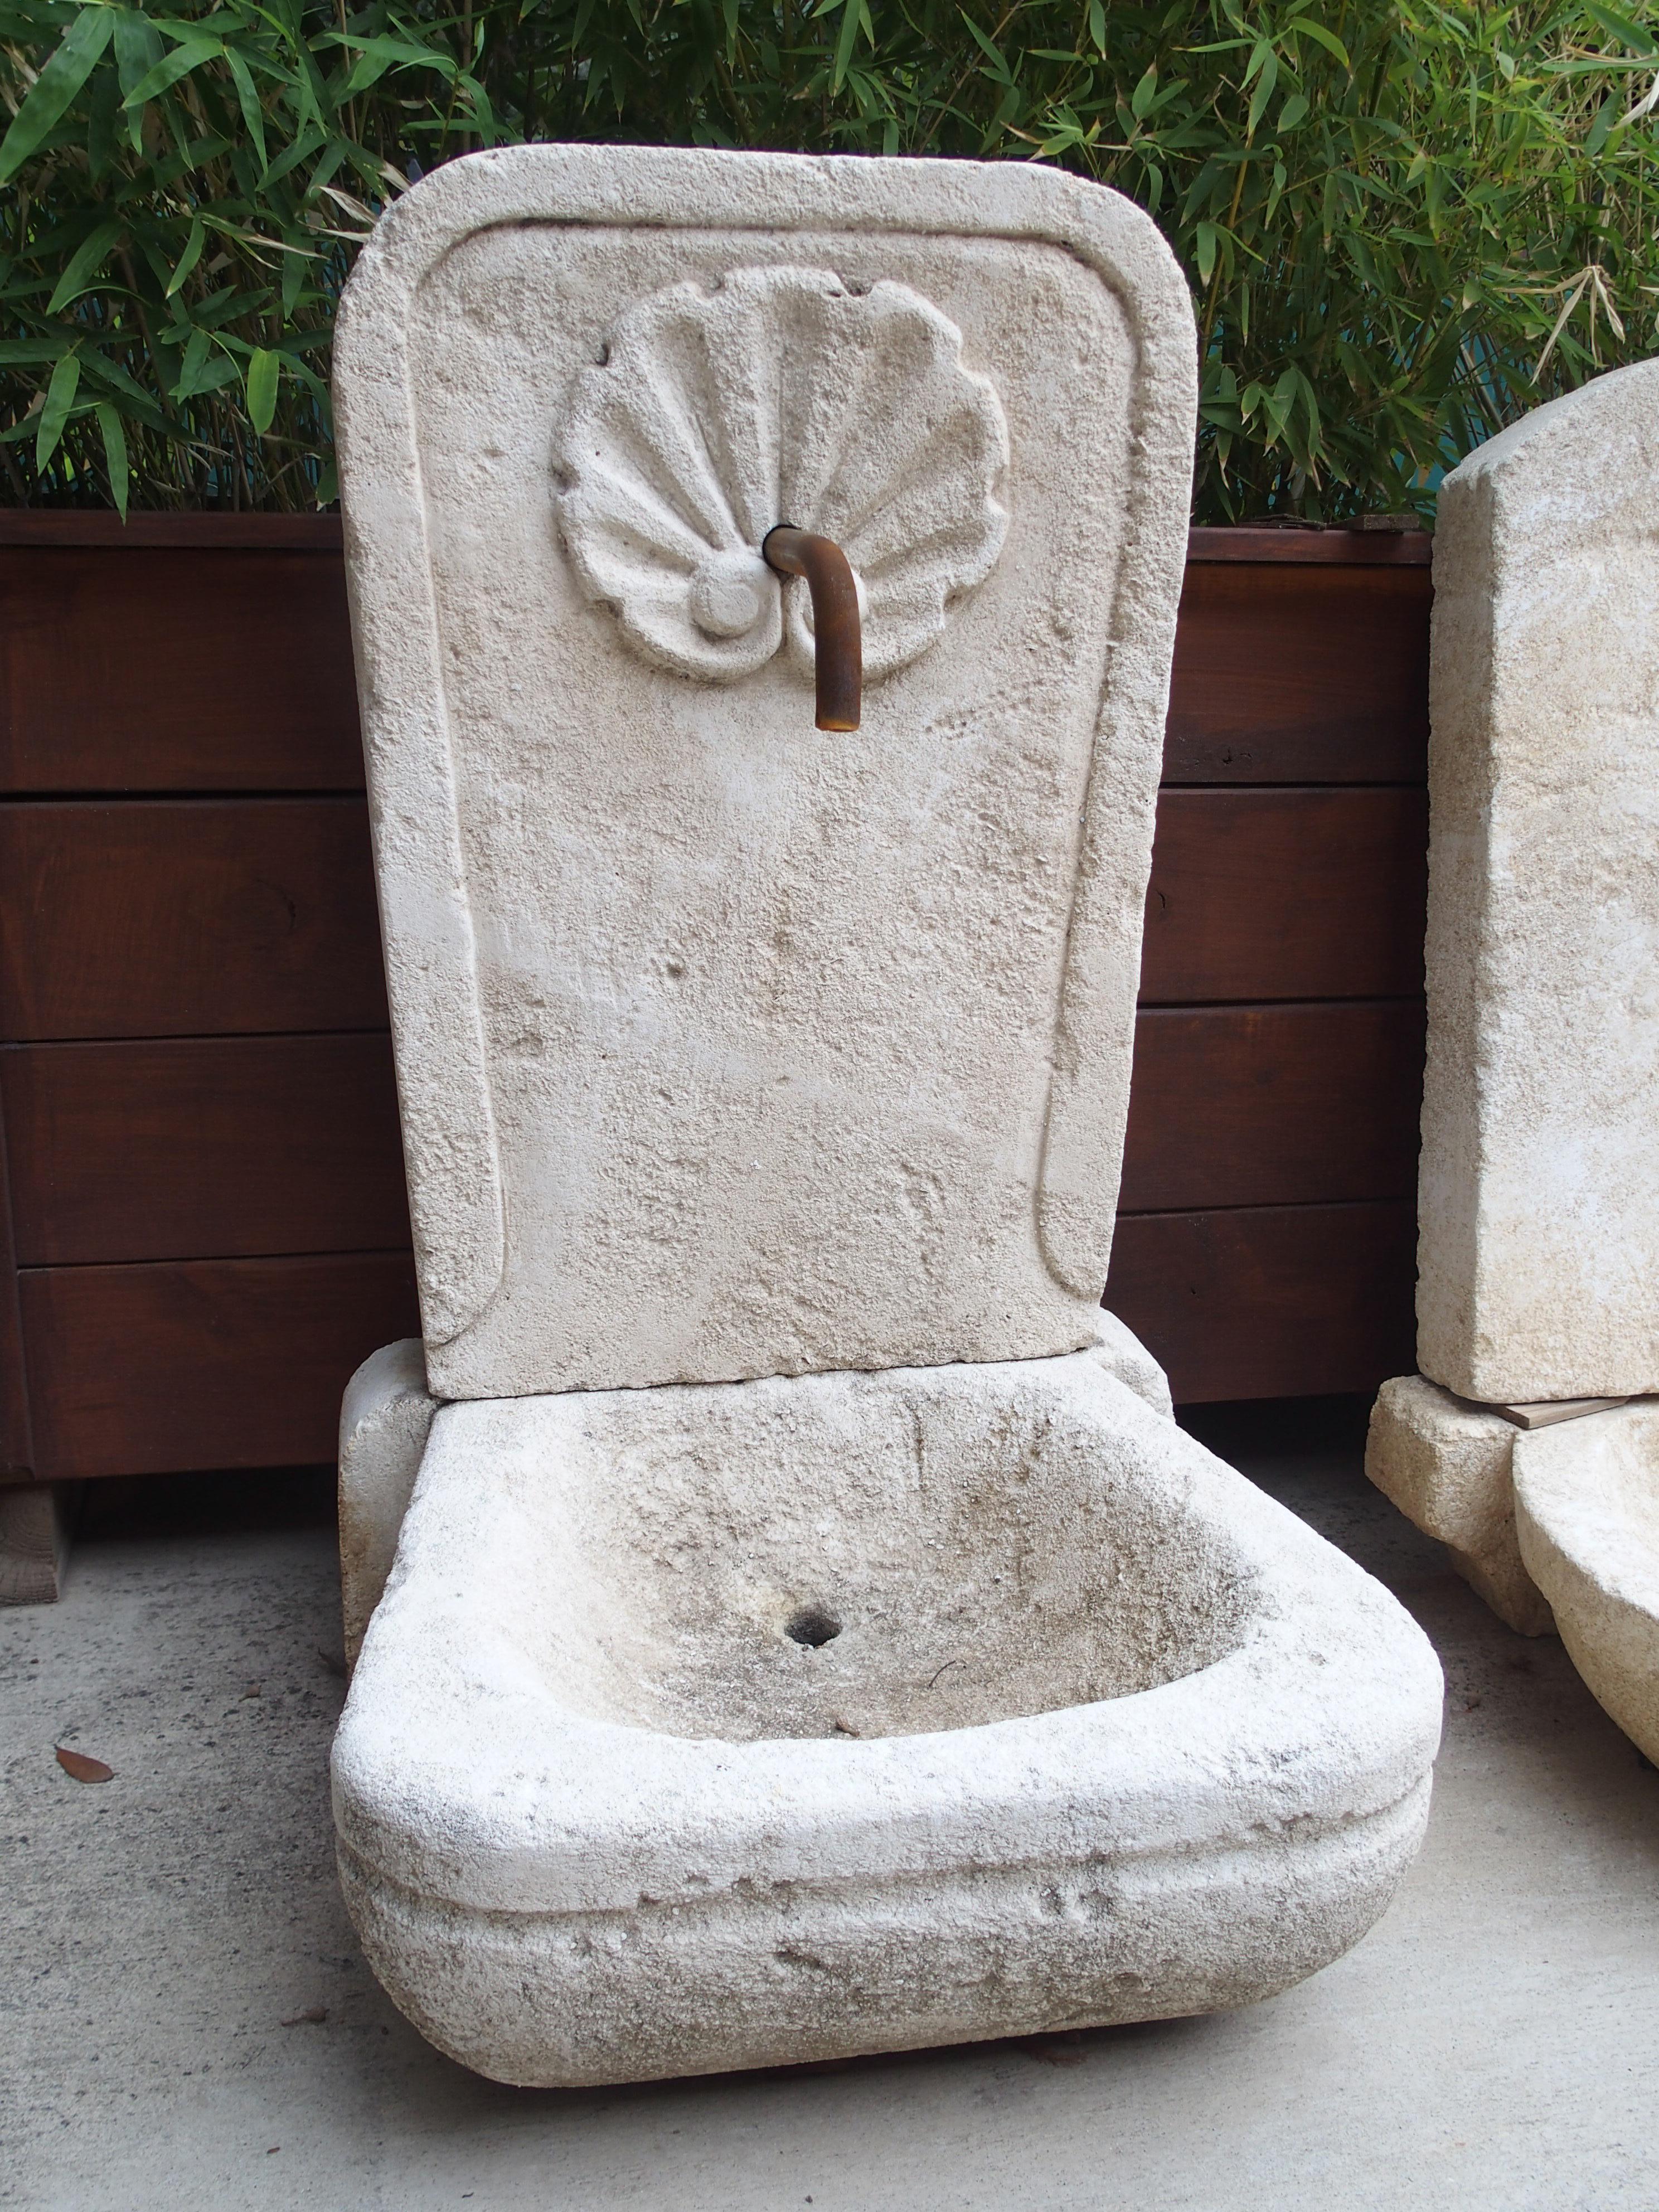 From Provence, France, this small wall fountain features two pieces of hand carved Estaillade limestone. The cream colored stone has developed a lovely golden brown patina in some areas, giving it a lovely, variegated appearance. A large, scalloped